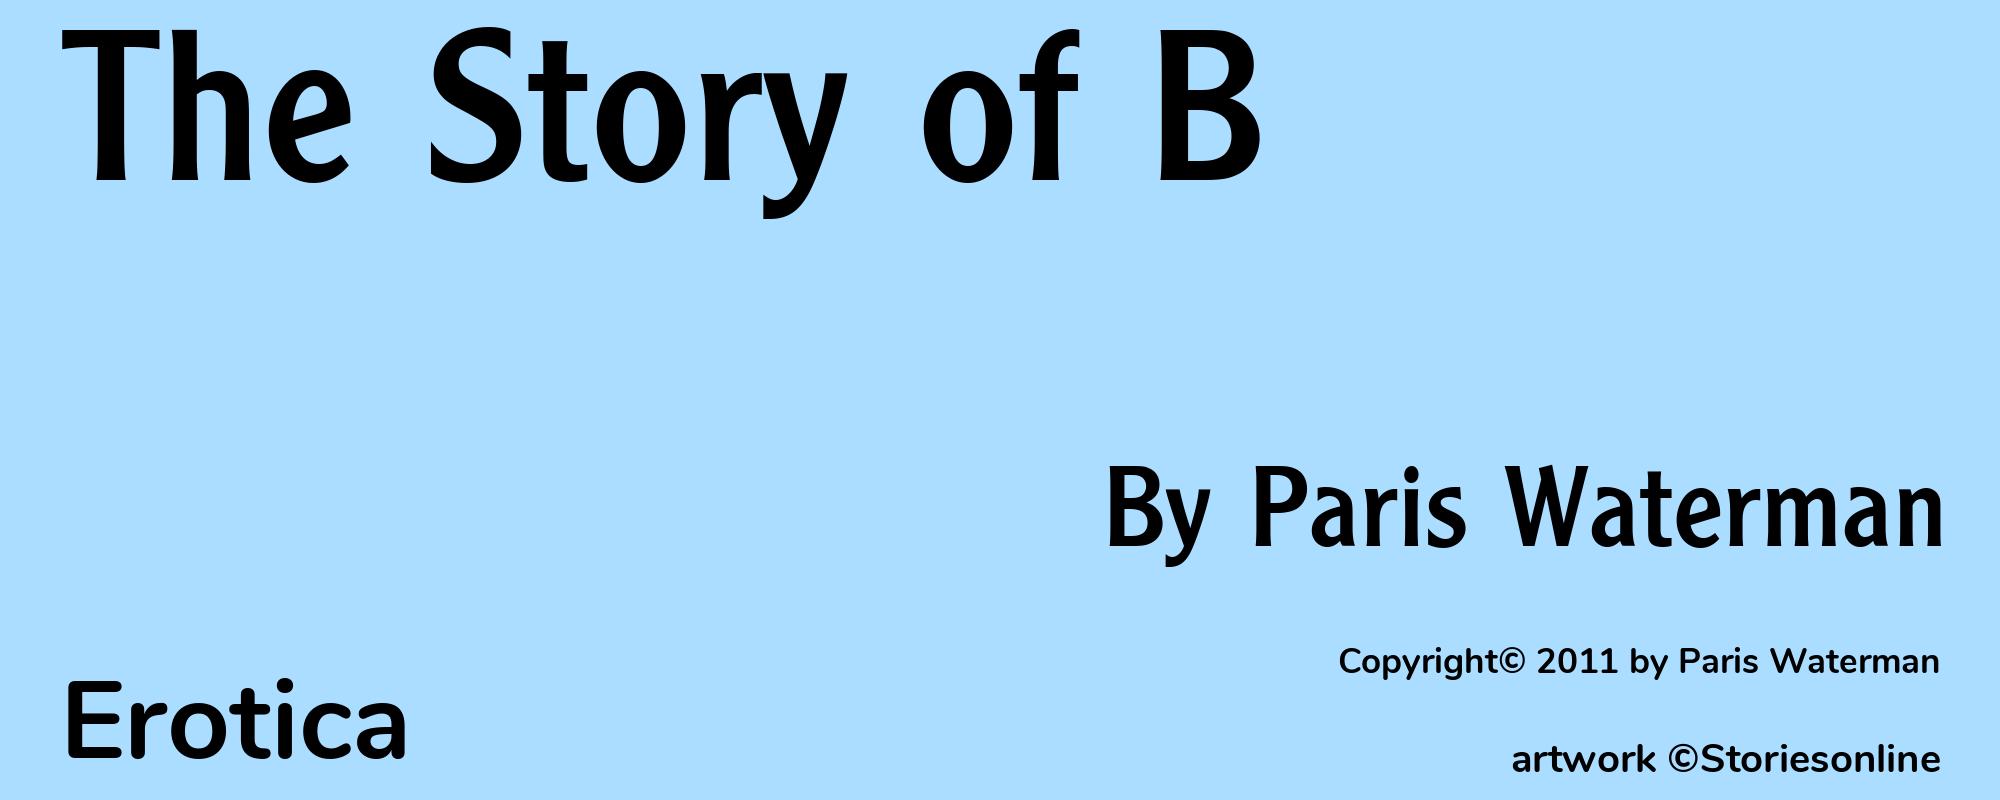 The Story of B - Cover